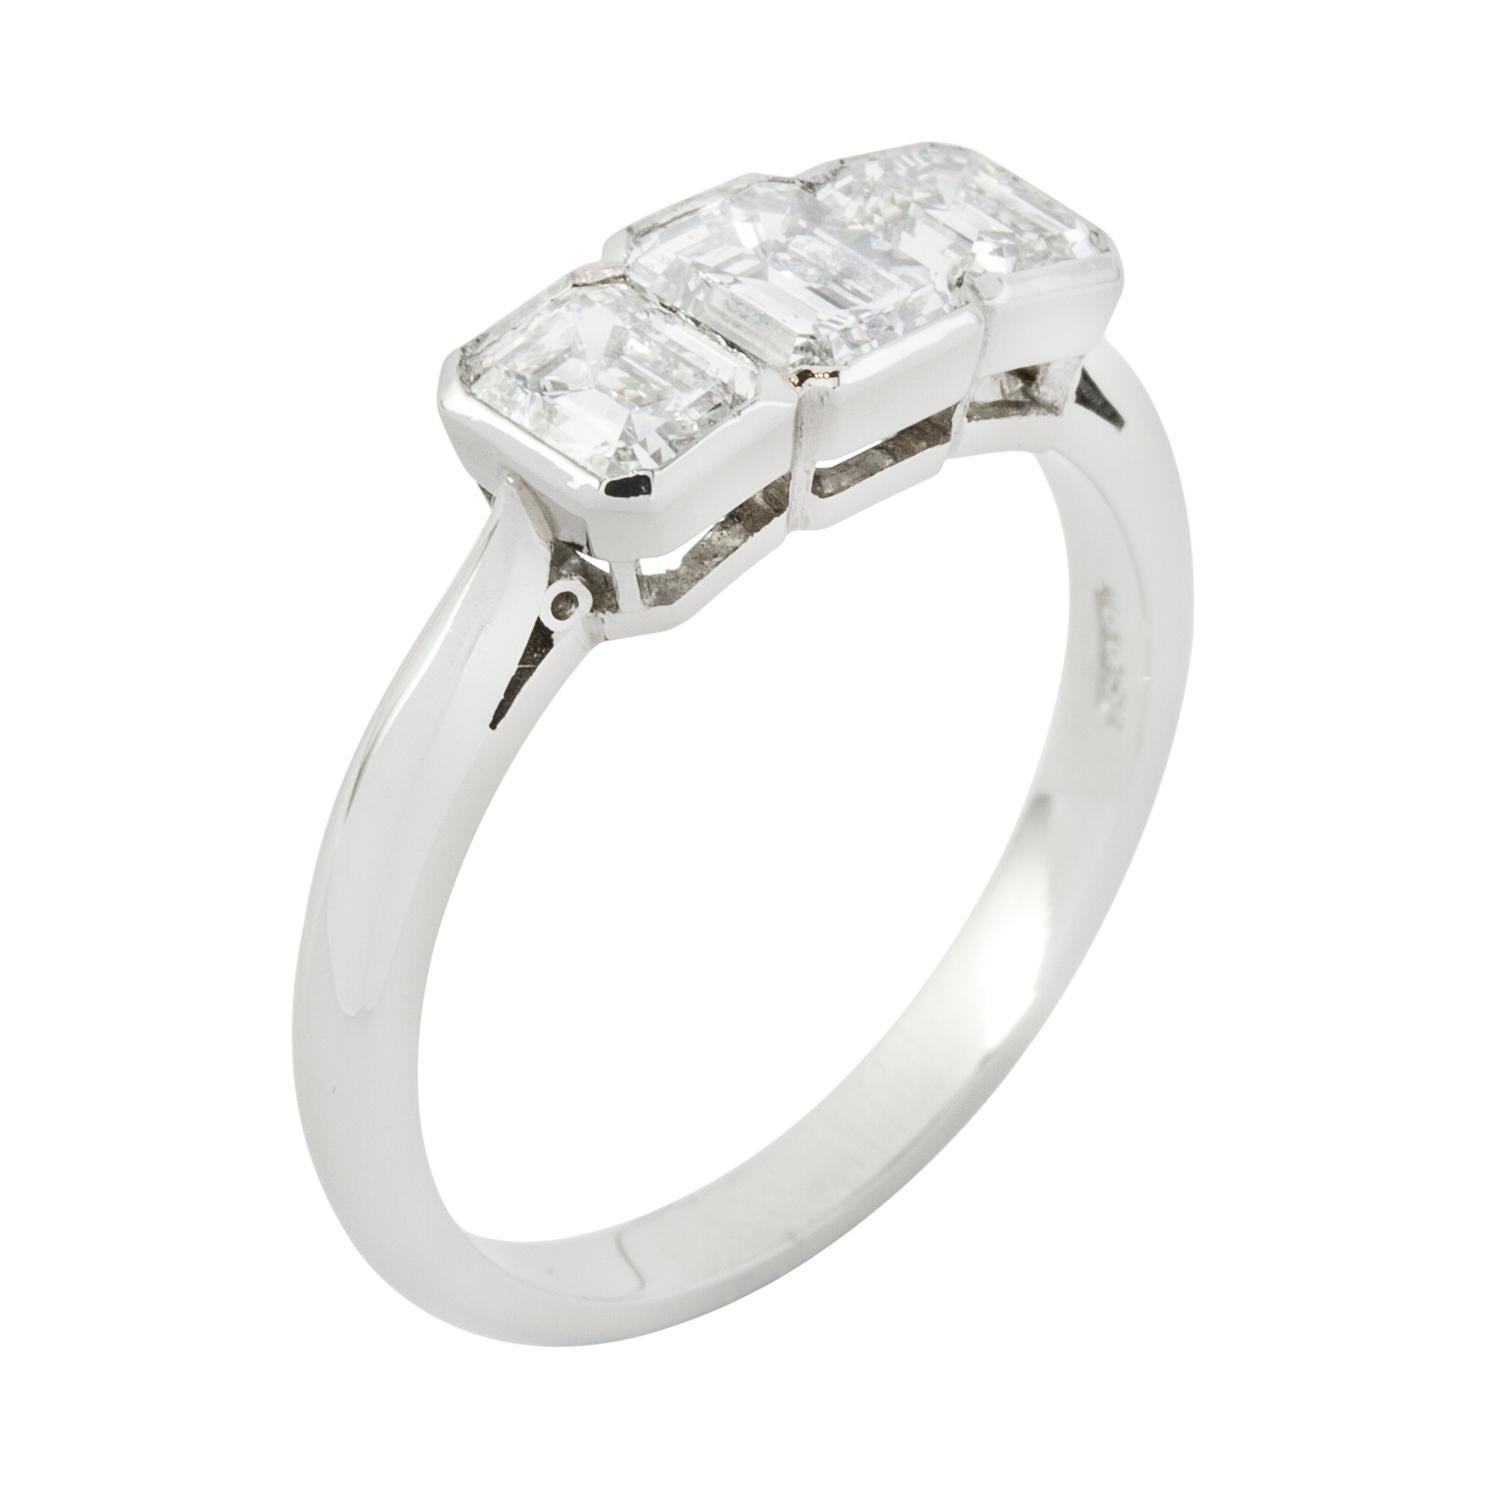 A diamond three stone ring, the three graduating emerald-cut diamonds, weighing a total of 1.15 carats, rub over set to a platinum mount, with cheniere shoulders, hallmarked platinum London 2012, bearing the Bentley and Skinner sponsor mark, head